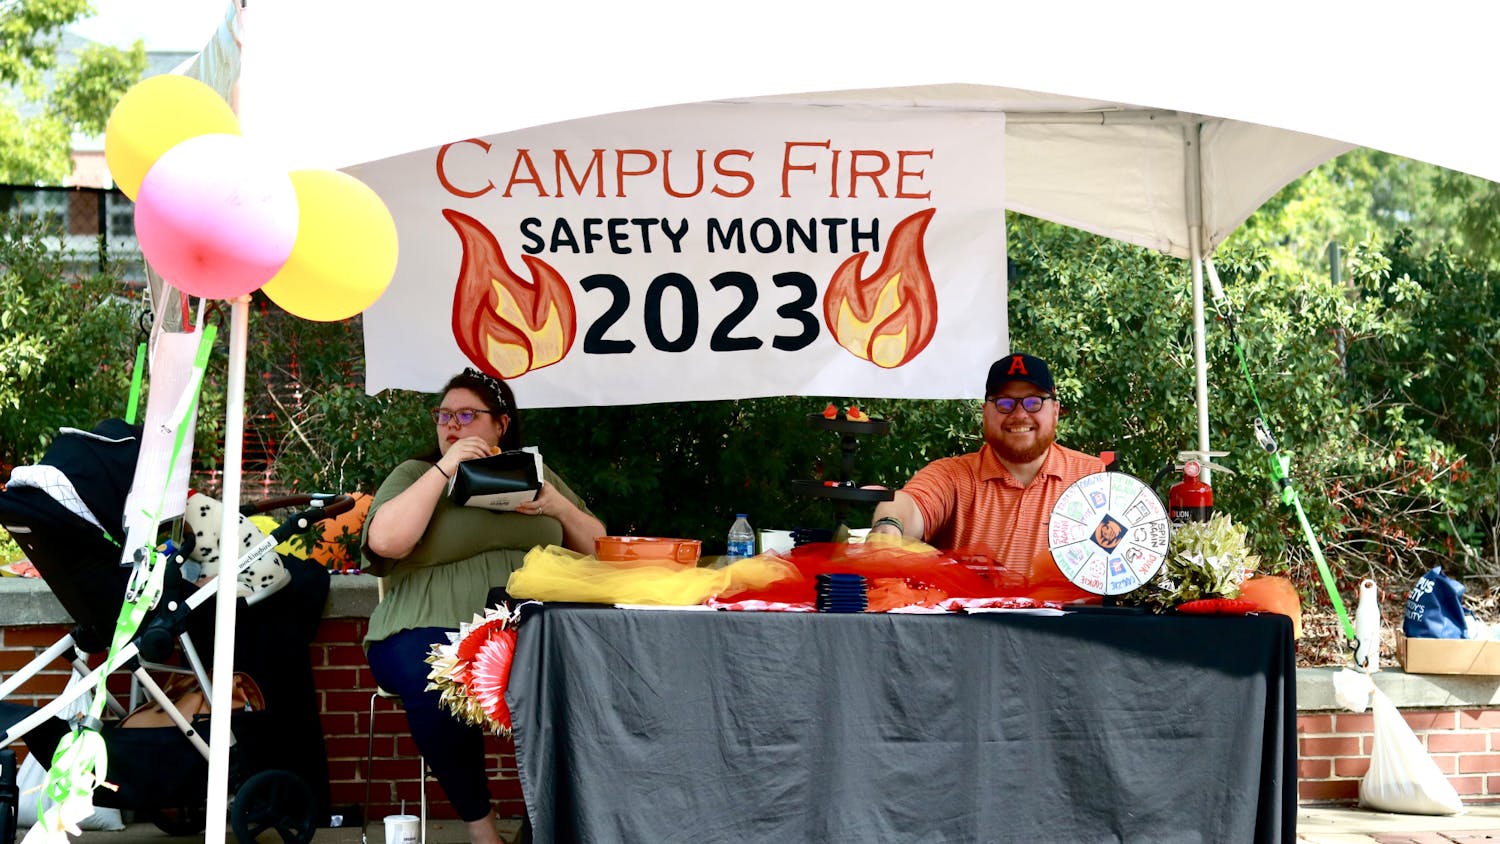 Campus Fire Safety Month